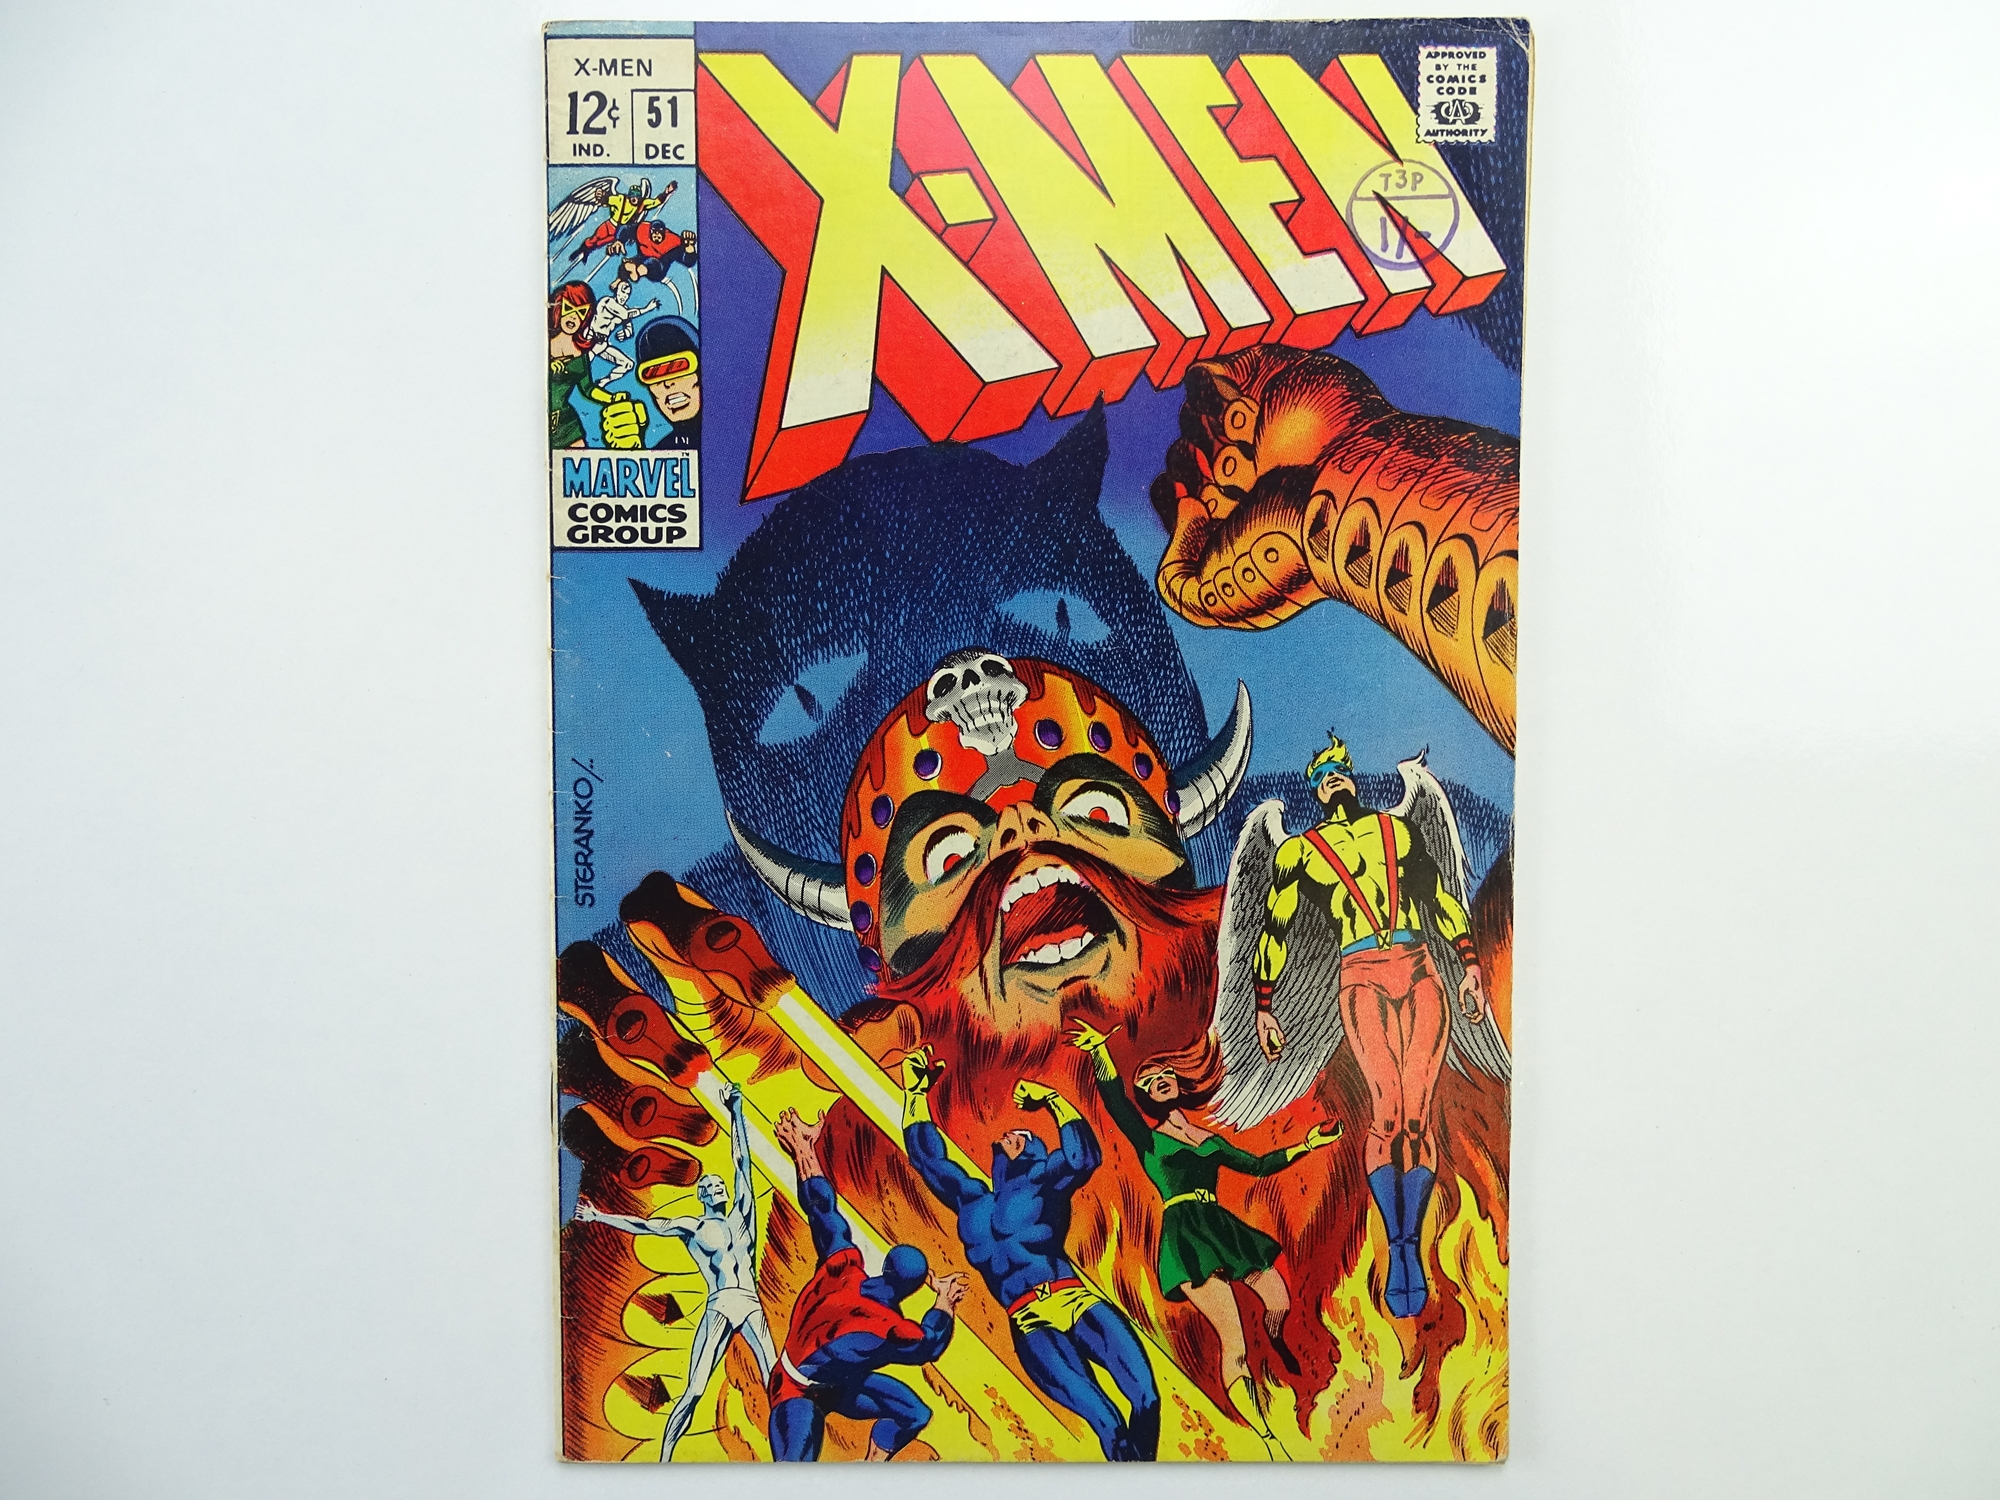 UNCANNY X-MEN # 51 - (1968 - MARVEL - Cents Copy with Pence Stamp) - First appearance (cameo) of